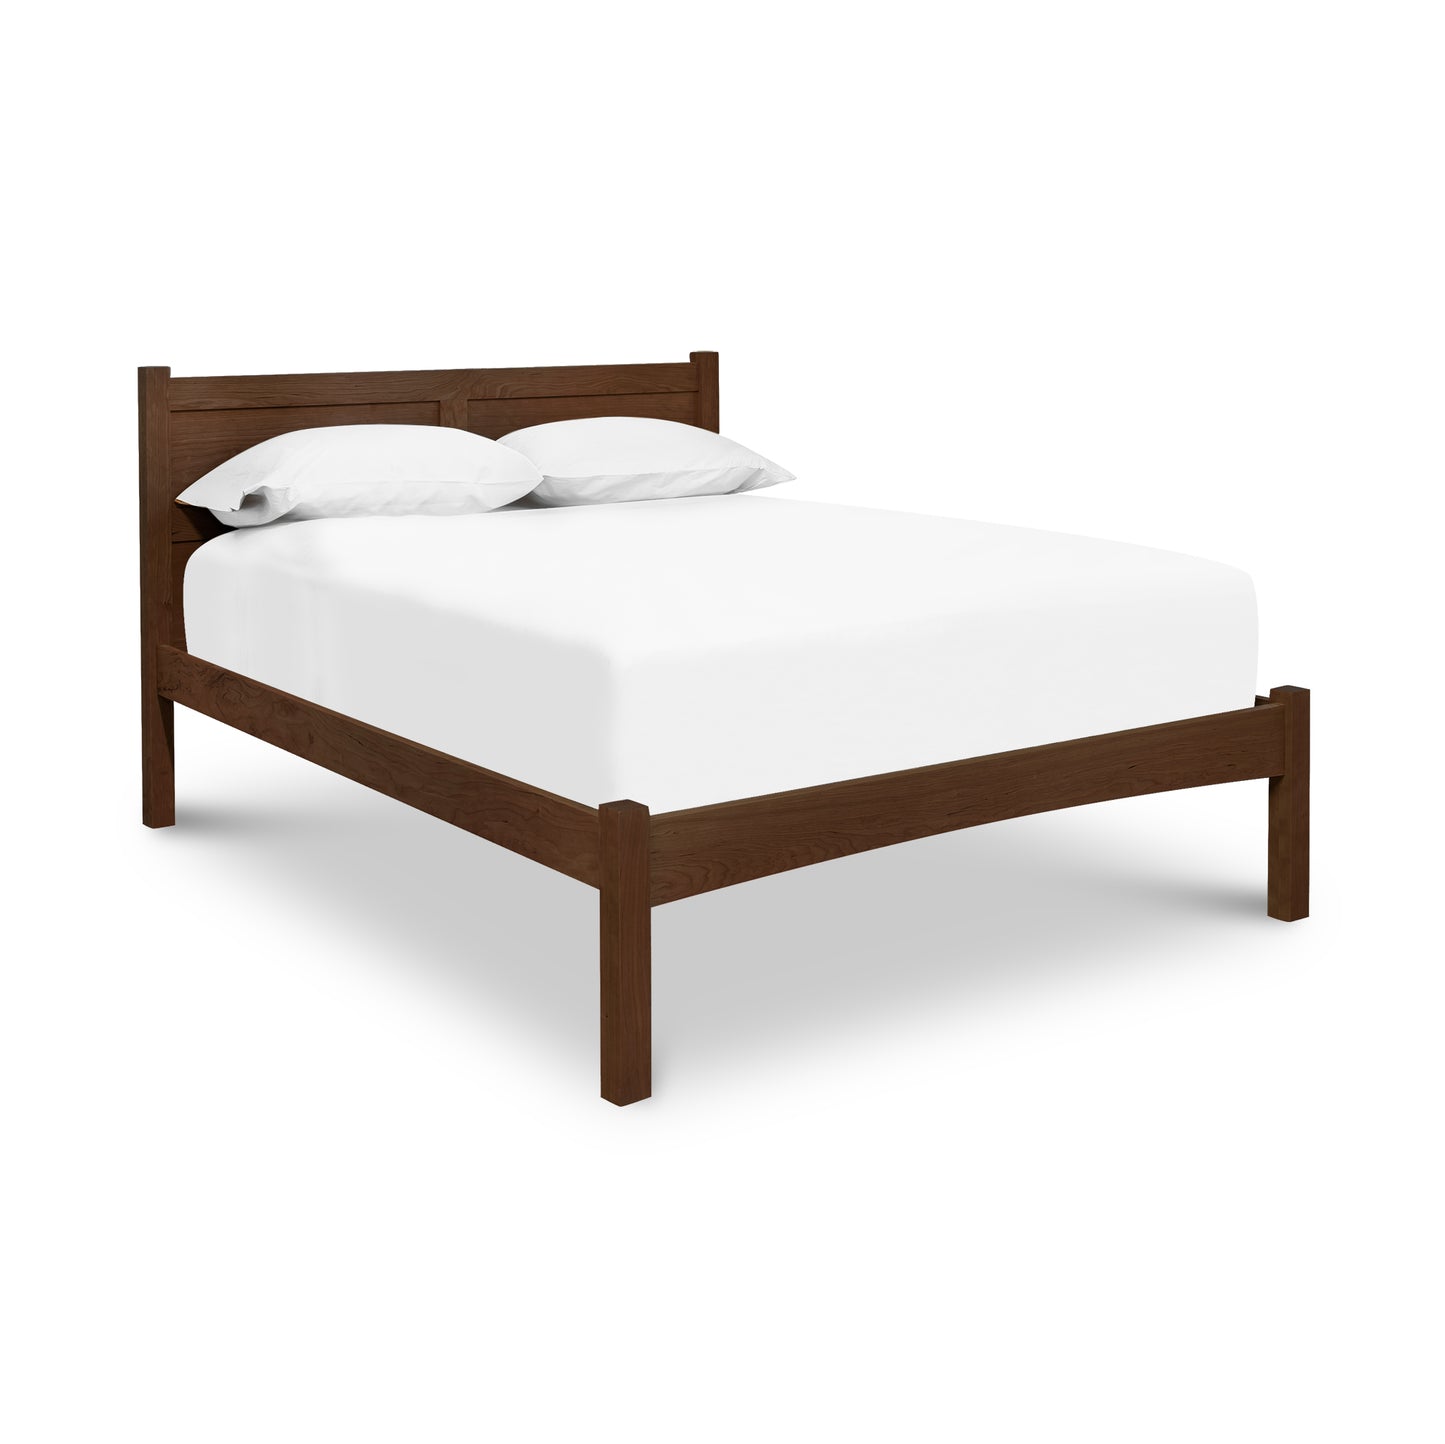 A cherry wood Vermont Furniture Designs Essex Low Footboard Bed frame with a white mattress and pillows on a white background.